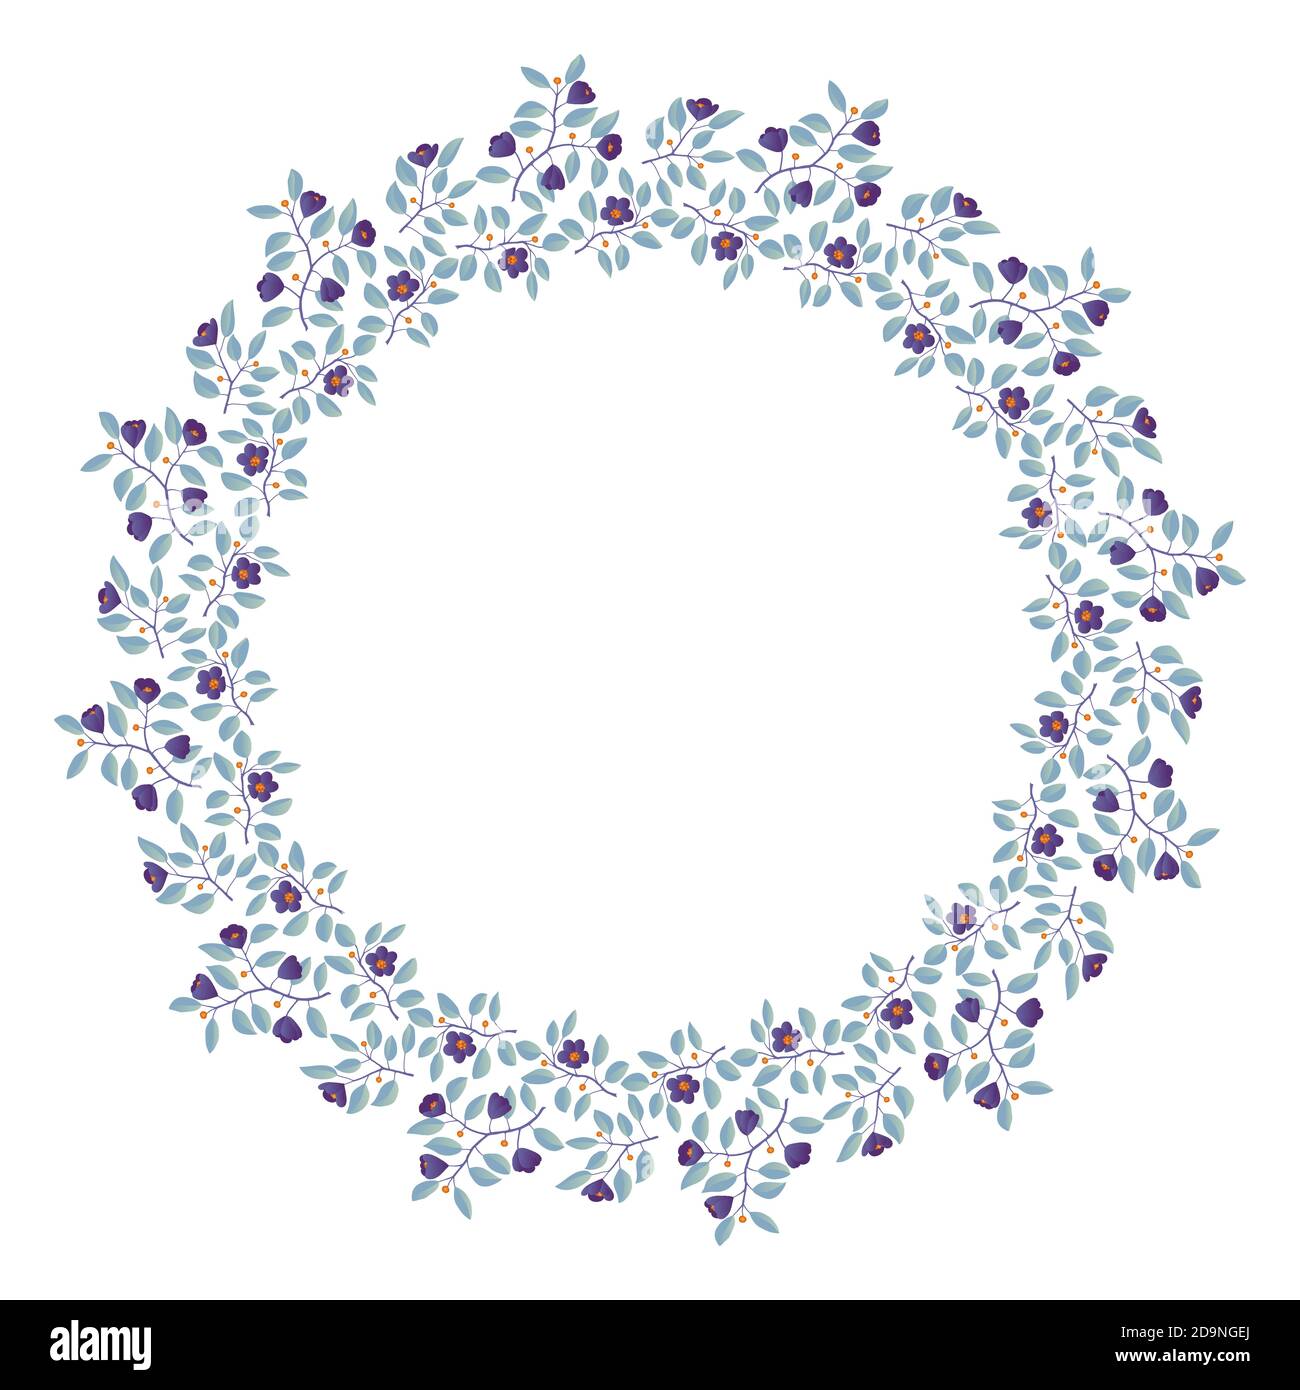 Floral wreath, branches with teal leaves and purple flowers on white. Vector illustration, design for poster, banner, invitation, book, fashion fabric, wrapping, packaging. Stock Vector